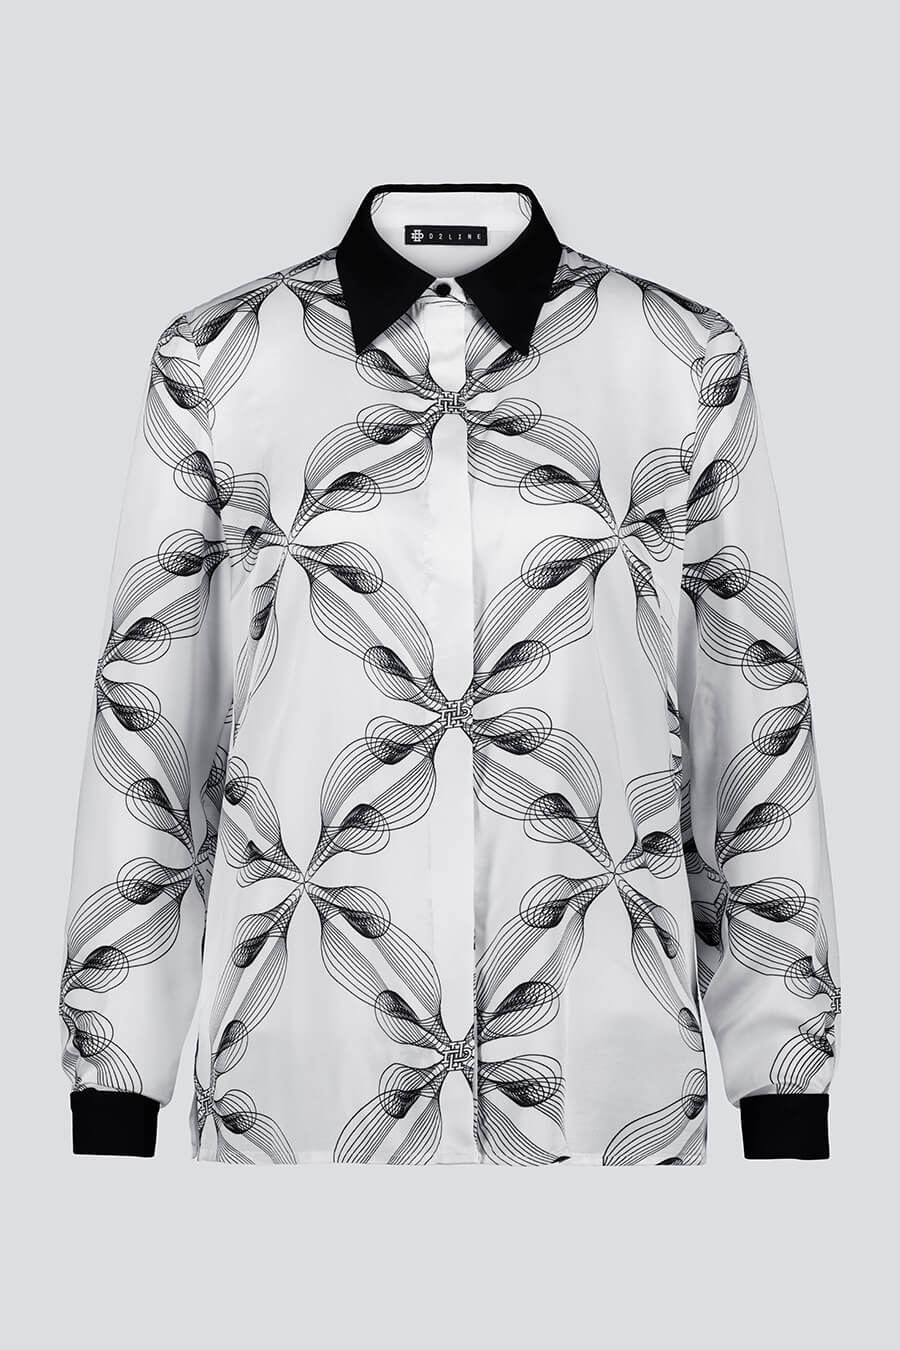 Satin shirt with long sleeves and black & white bespoke print | D2line